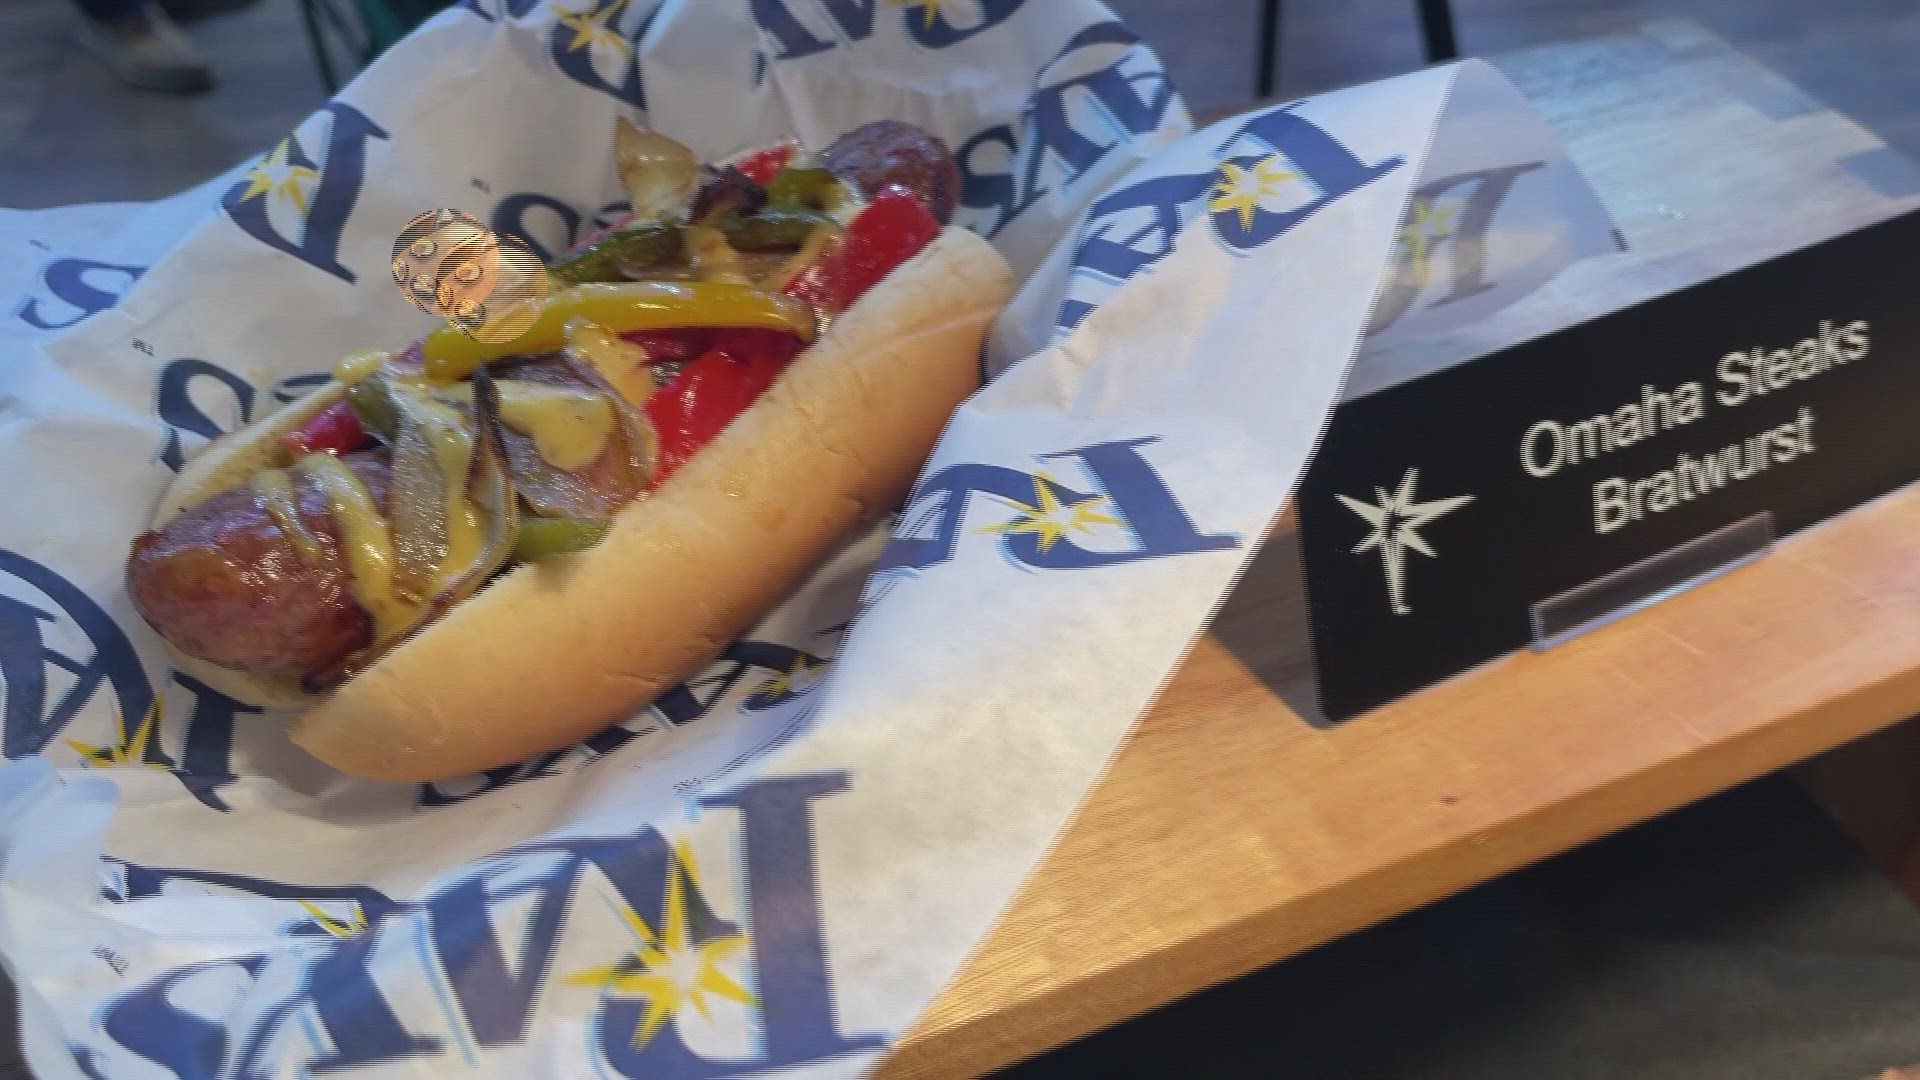 Rays opening day is still a few days away, but 10 Tampa Bay got a sneak peek at the new food coming to concession stands throughout Tropicana Field in 2023.